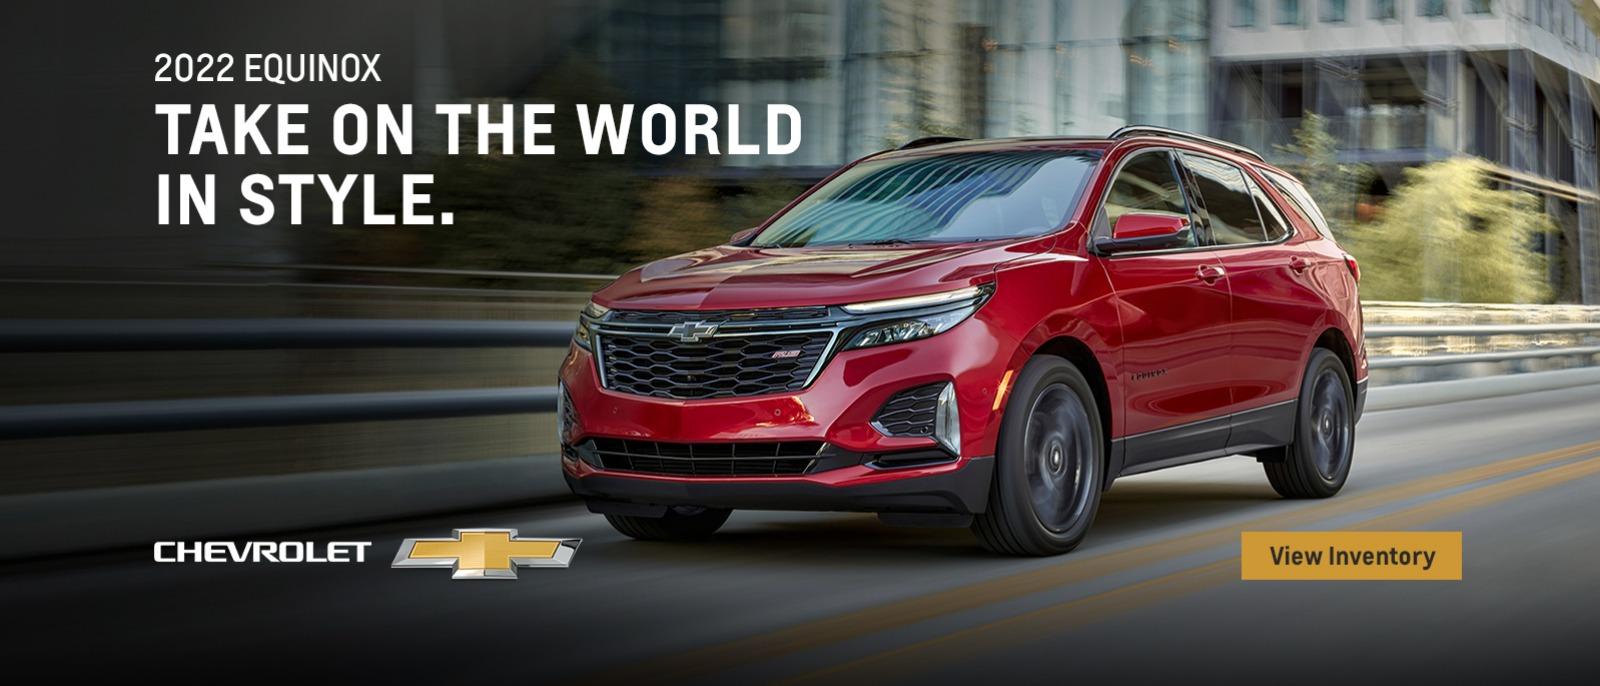 2022 Chevy Equinox. Take on the world in style.